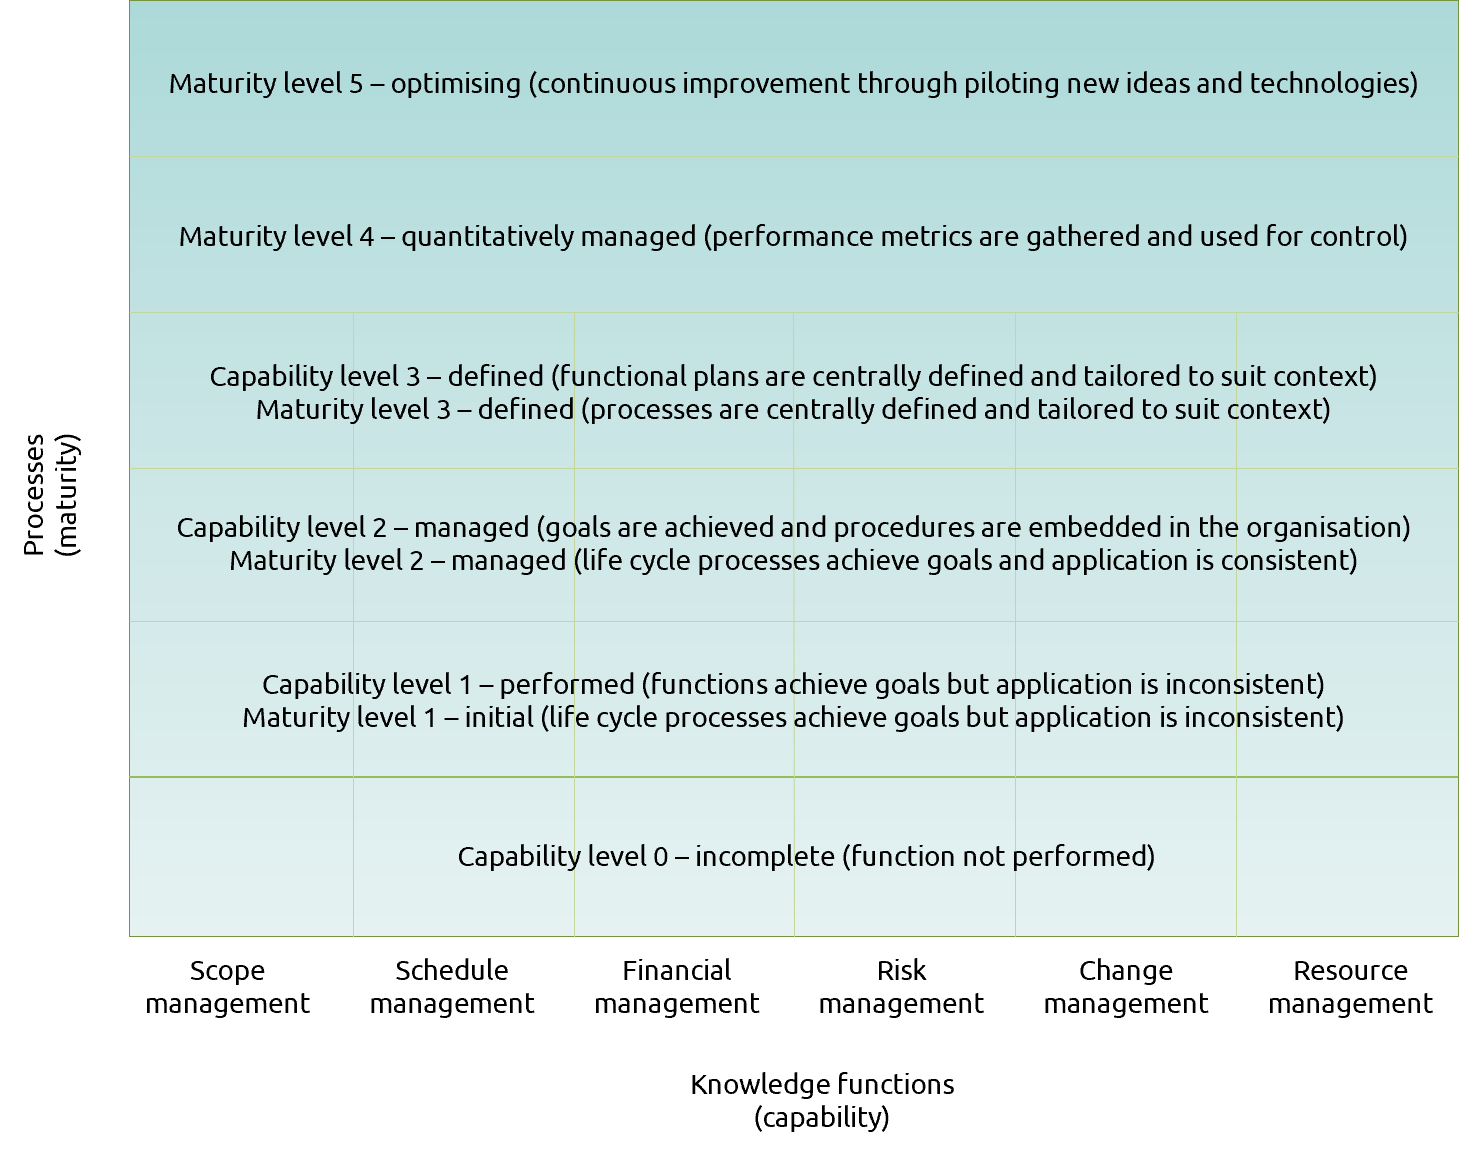 Table showing levels of capability and maturity